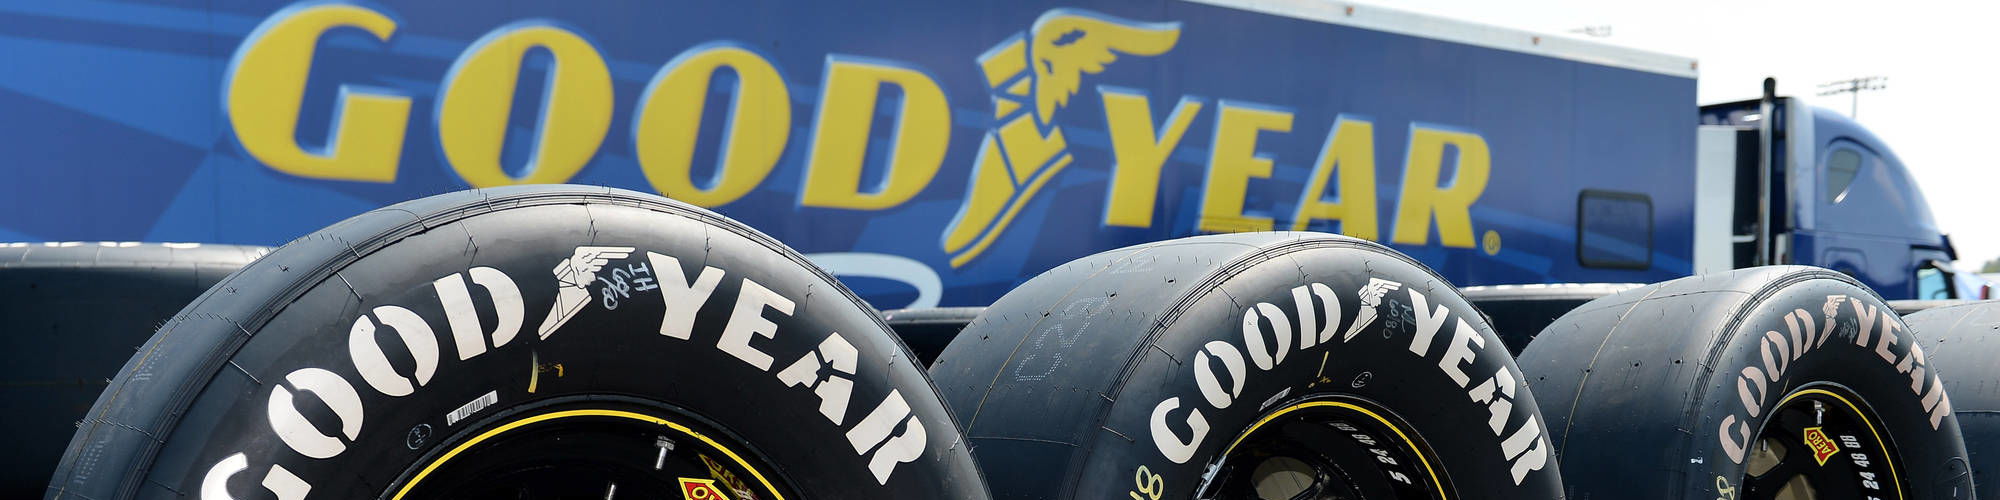 Goodyear cover image